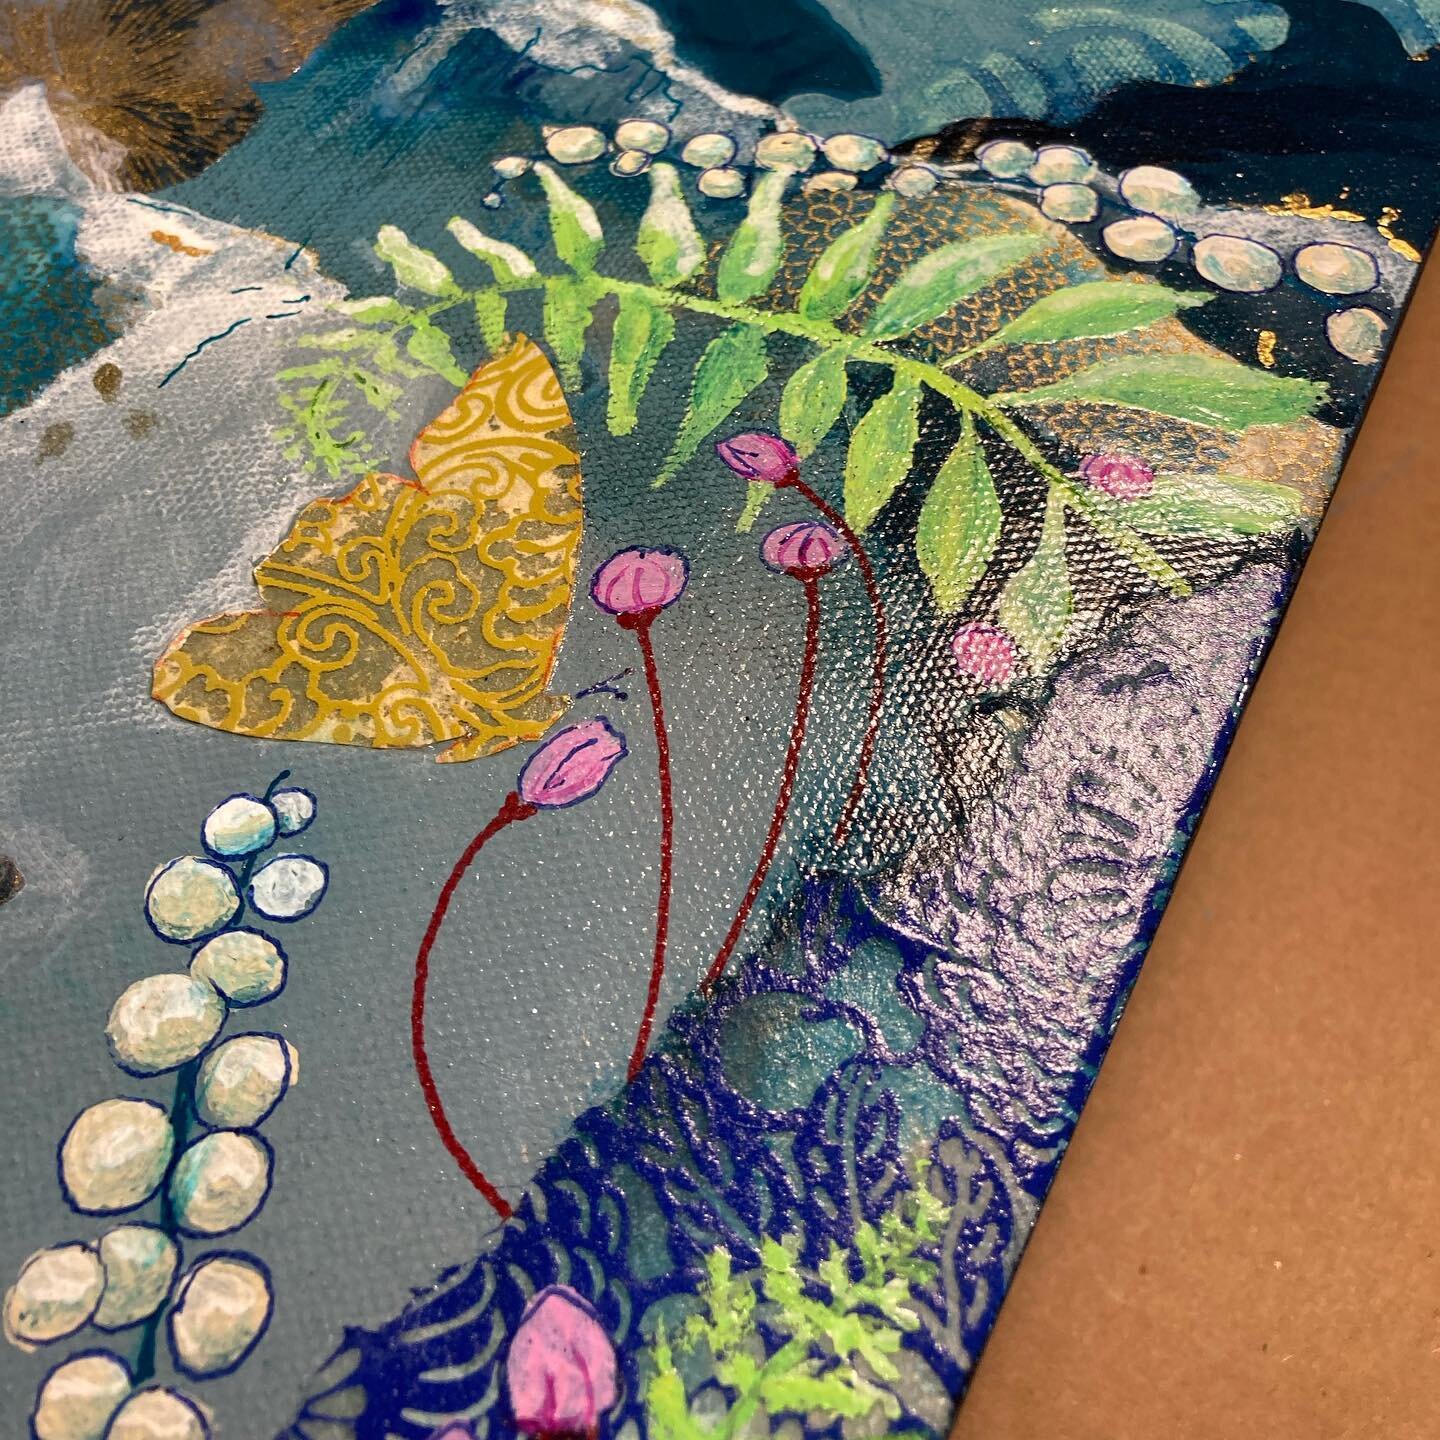 Another little detail. 

#mixedmedia #collageart #pollinators #nativeplants #acrylic #prettypapers #ink #ferns